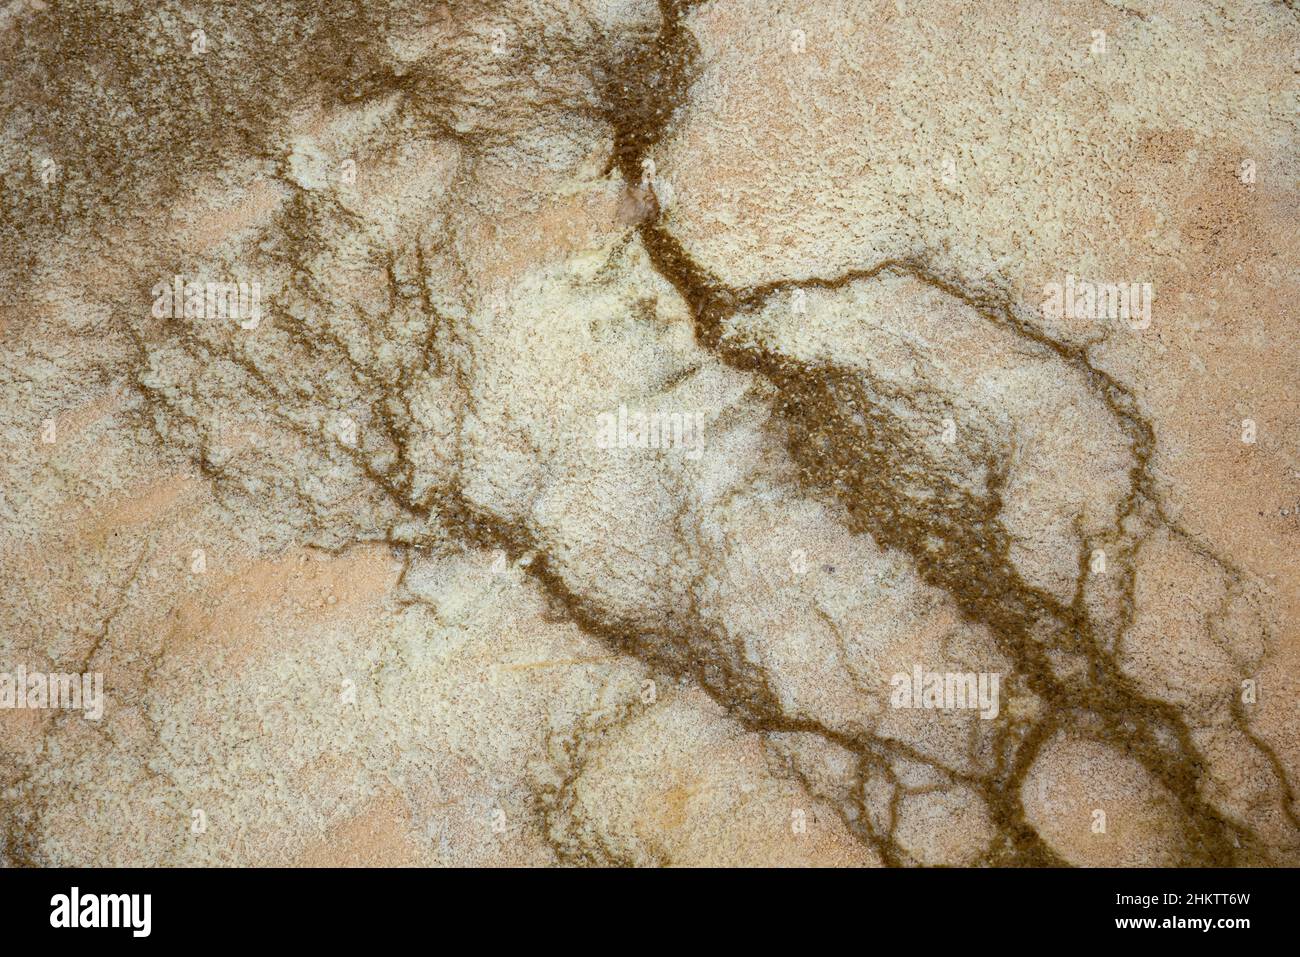 Bacterial mat in hot spring at Fountain Paint Pots in Yellowstone National Park. Stock Photo